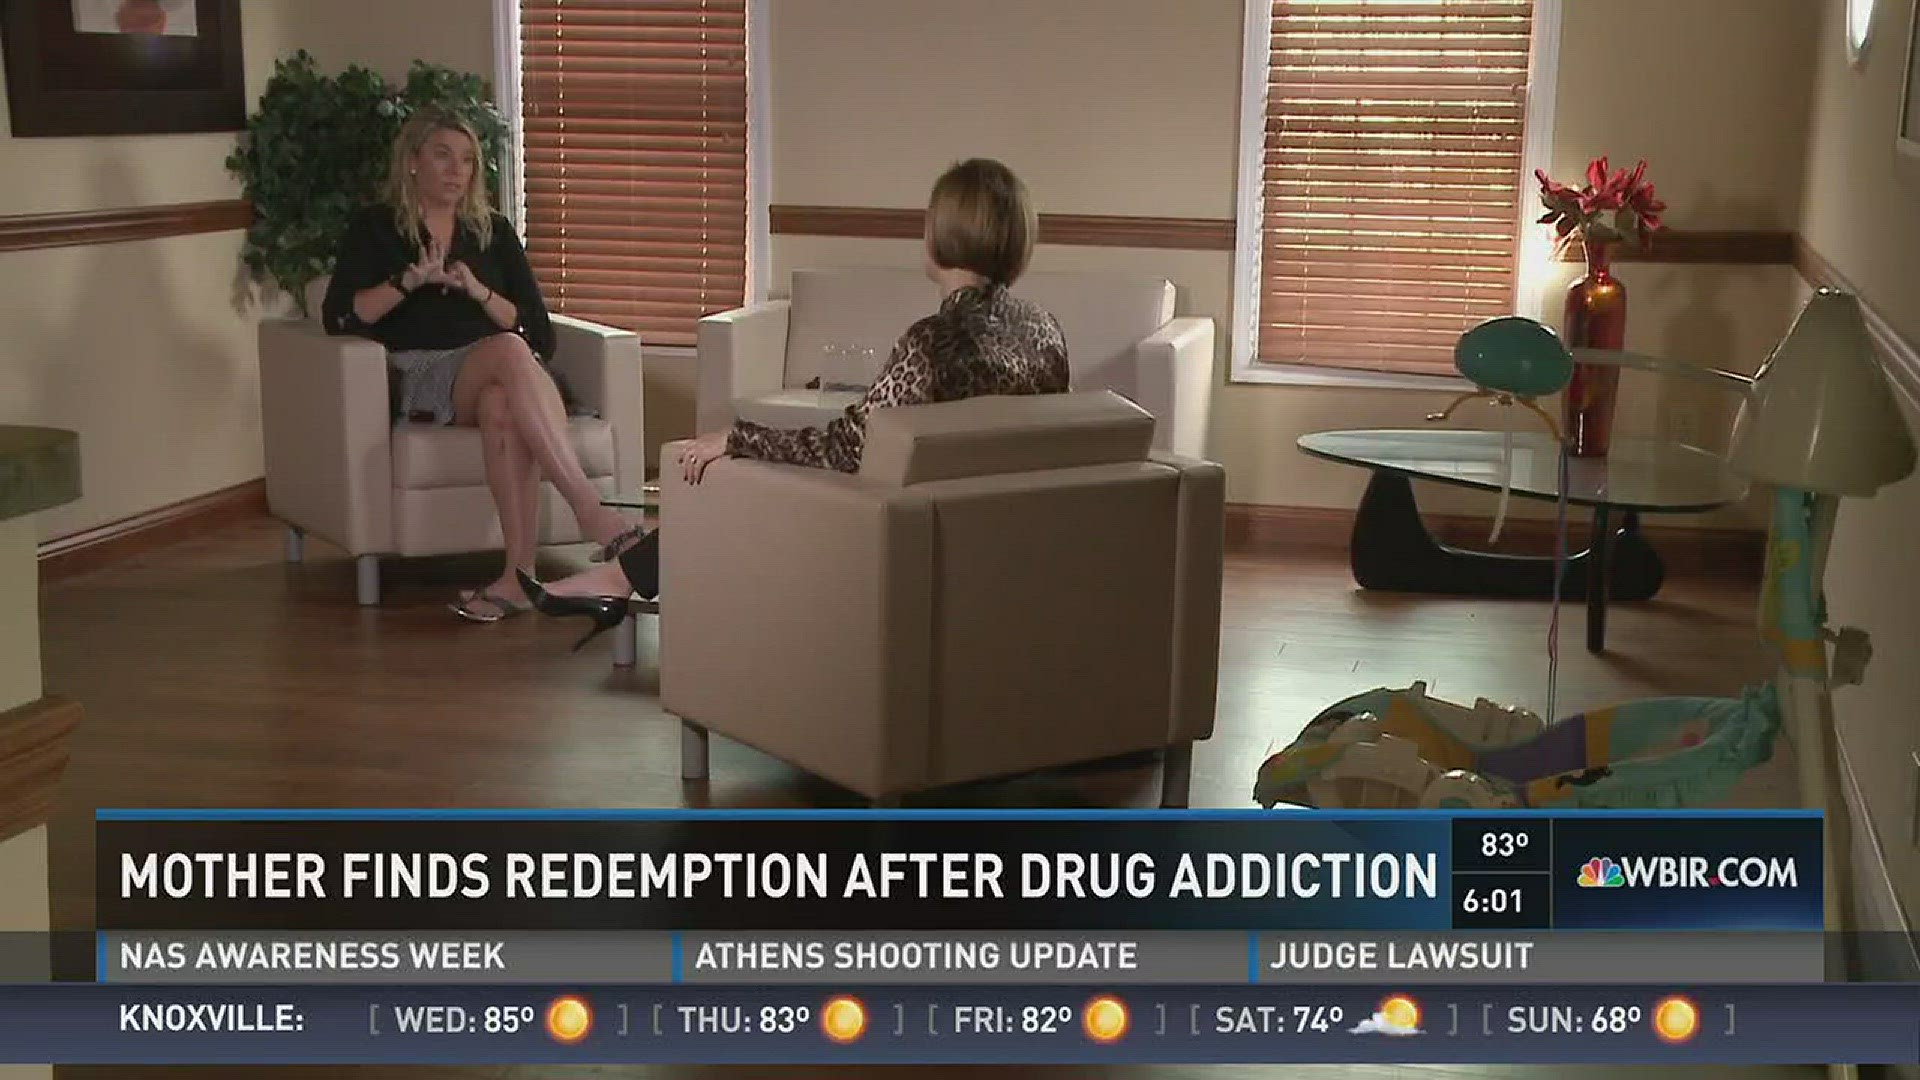 Oct. 4, 2016: A mother who fought addiction and criminal charges for giving birth to a drug addicted baby is sharing her story of redemption to encourage others who are in a similar situation.